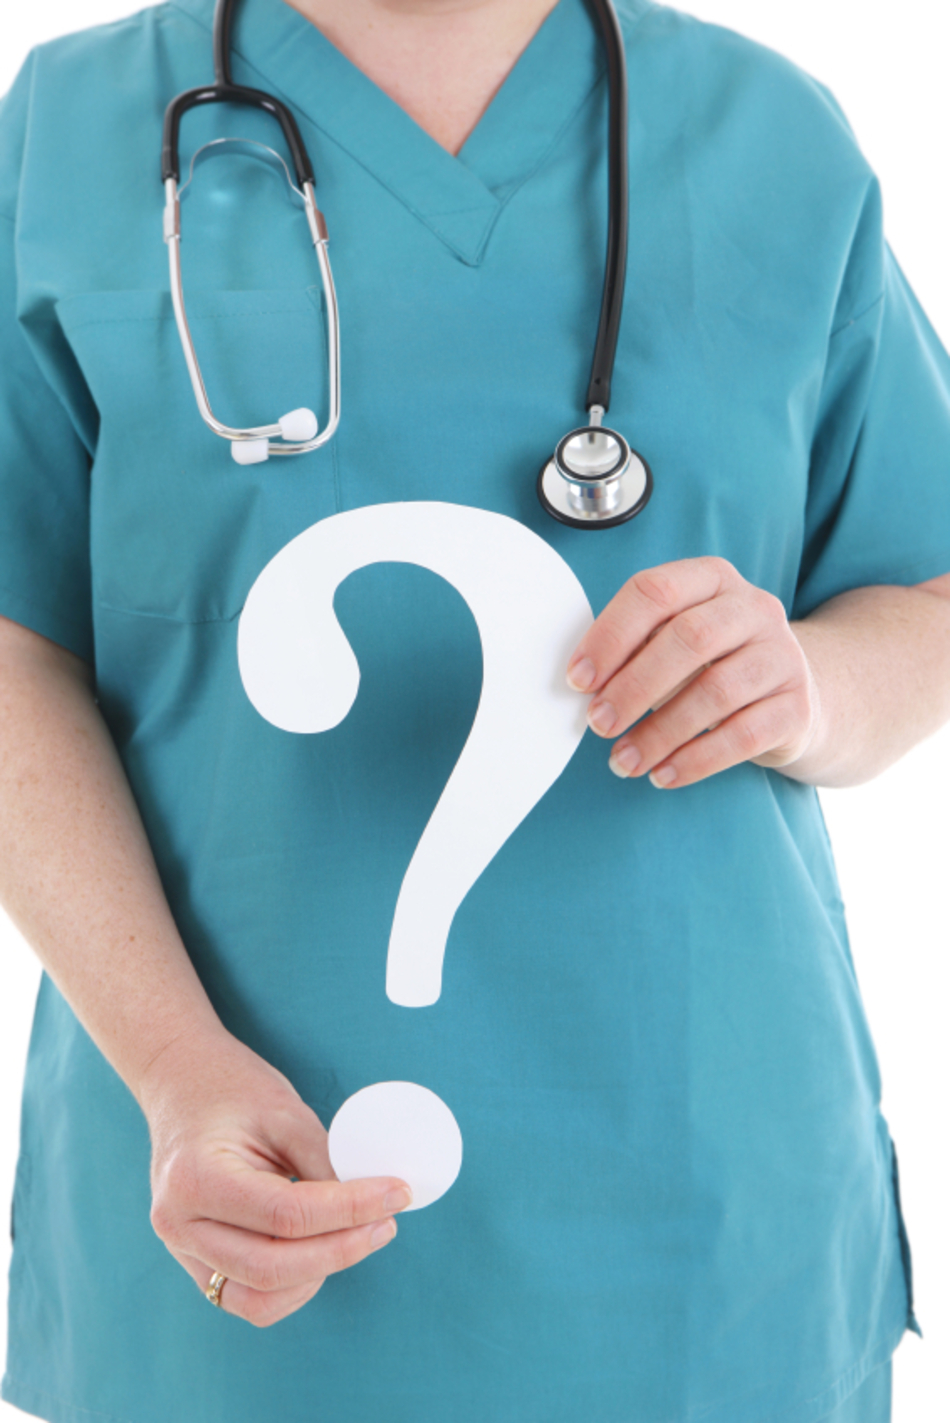 Careers in Health Care: Are You Sure a PA Program is Right for You?